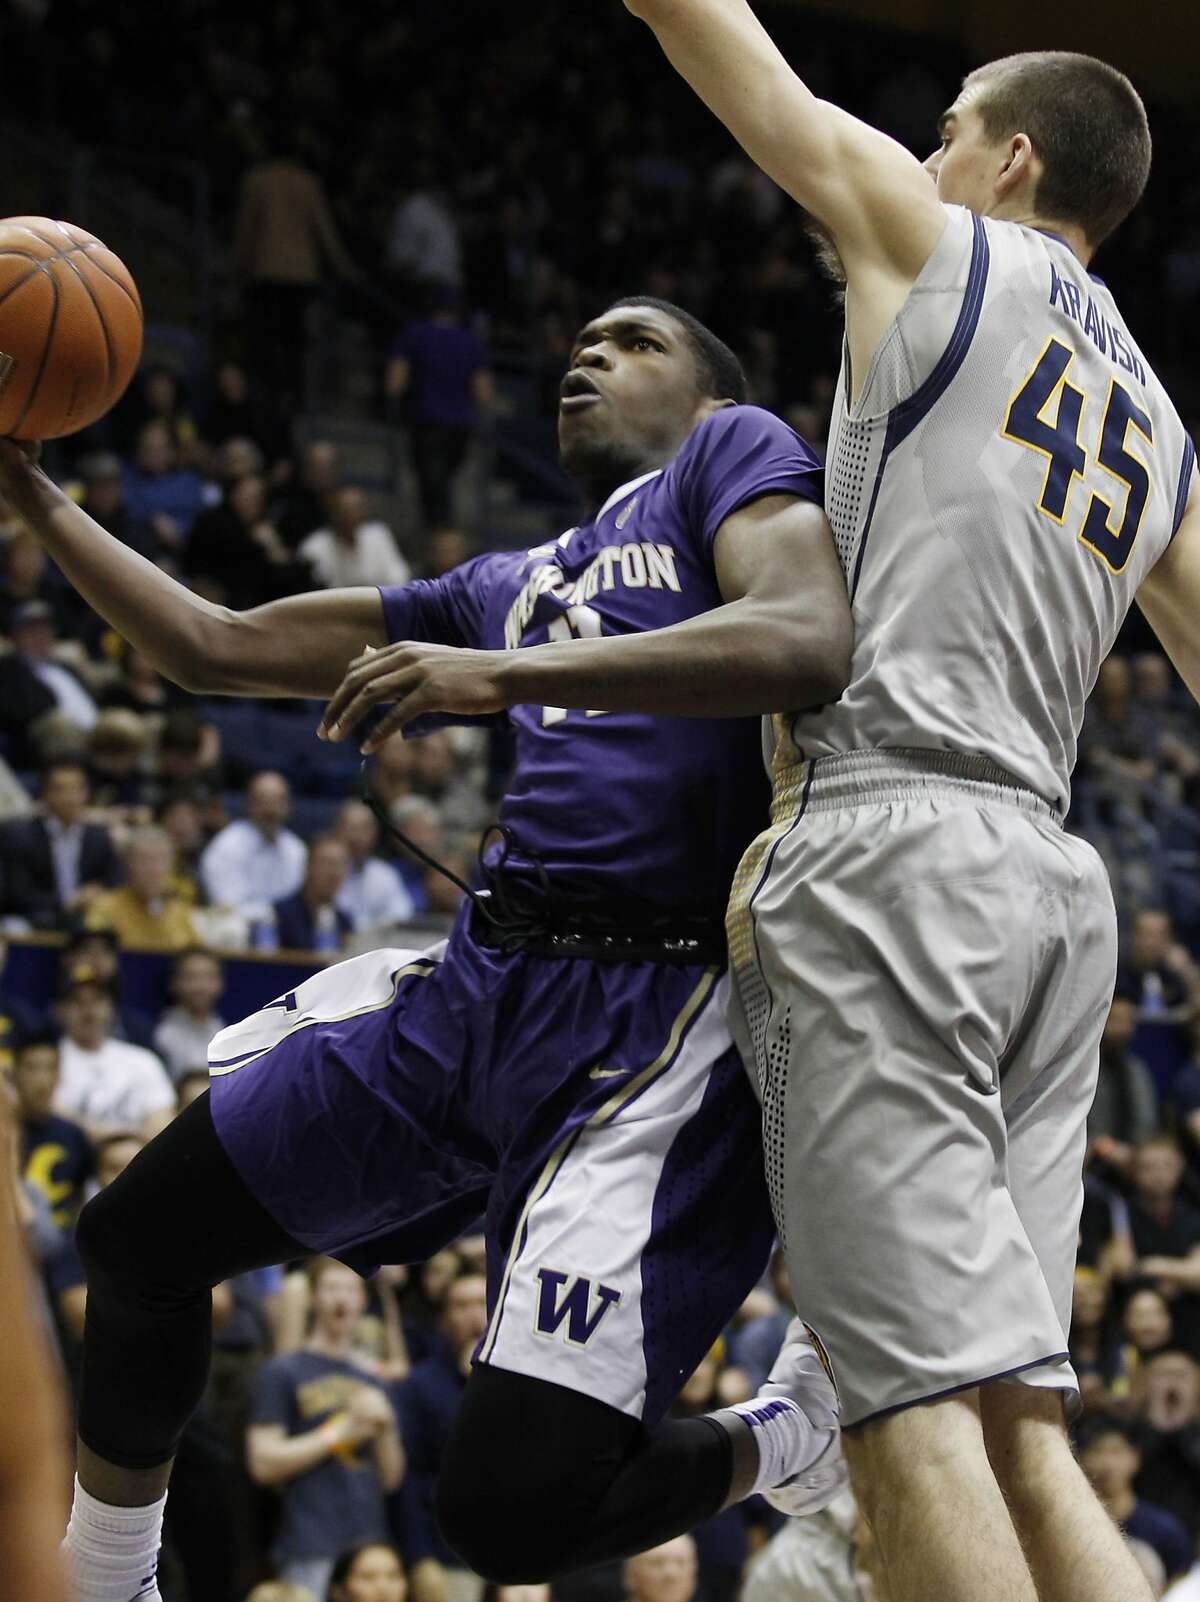 Washington's Mike Anderson, left, goes up as California's David Kravish defends during the first half of an NCAA college basketball game, Wednesday, Jan. 15, 2014, in Berkeley, Calif. (AP Photo/George Nikitin)